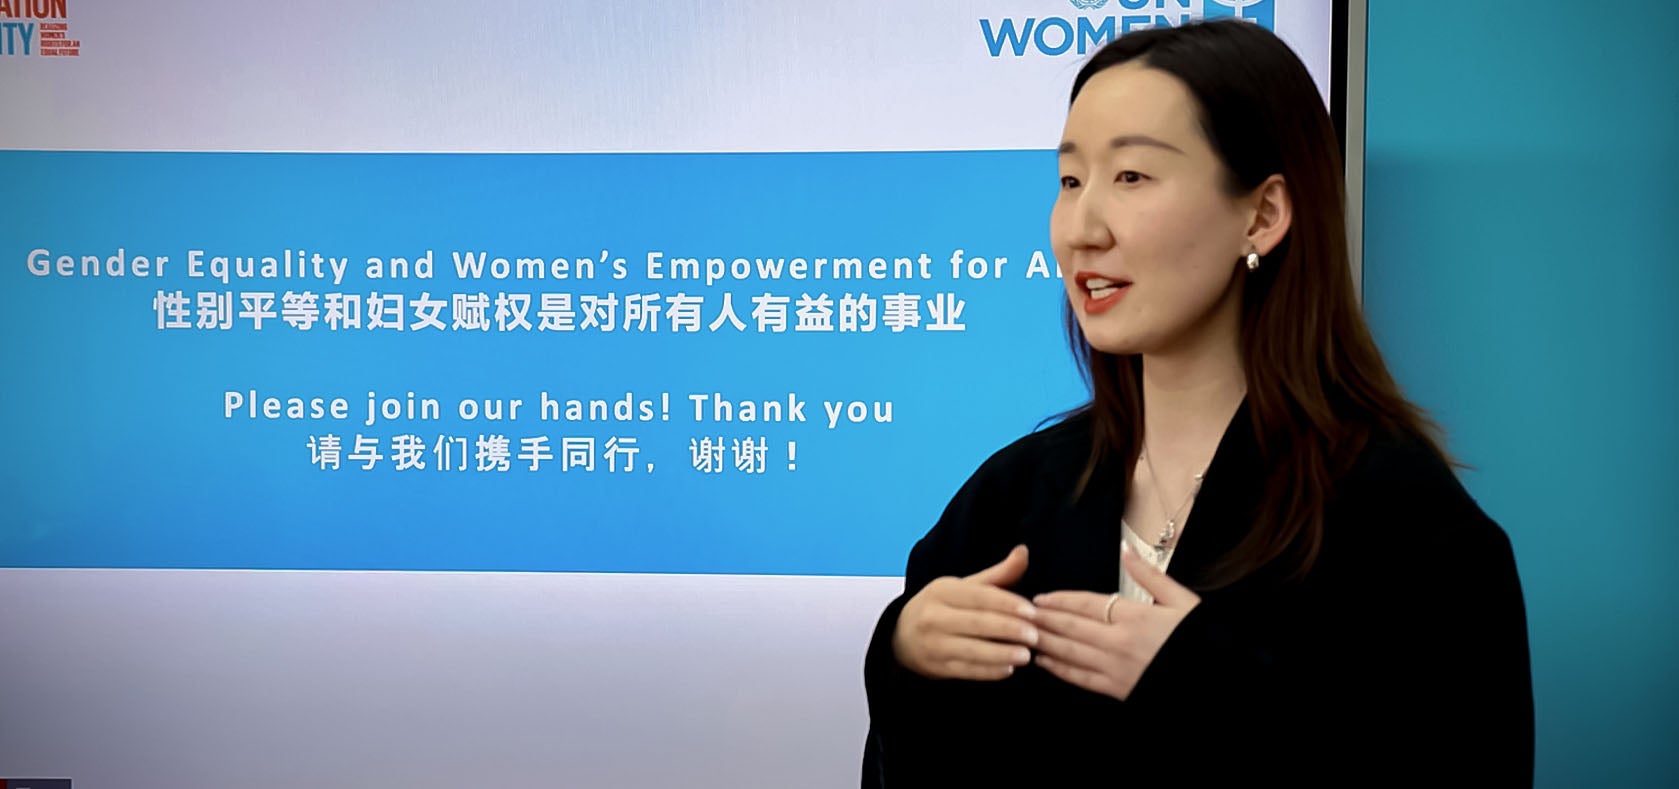 Xiaerbati Daositeke, a Chinese woman is standing in front of a big LCD screen (around 85 inches) while providing her lecture on Gender Equality and Women empowerment.